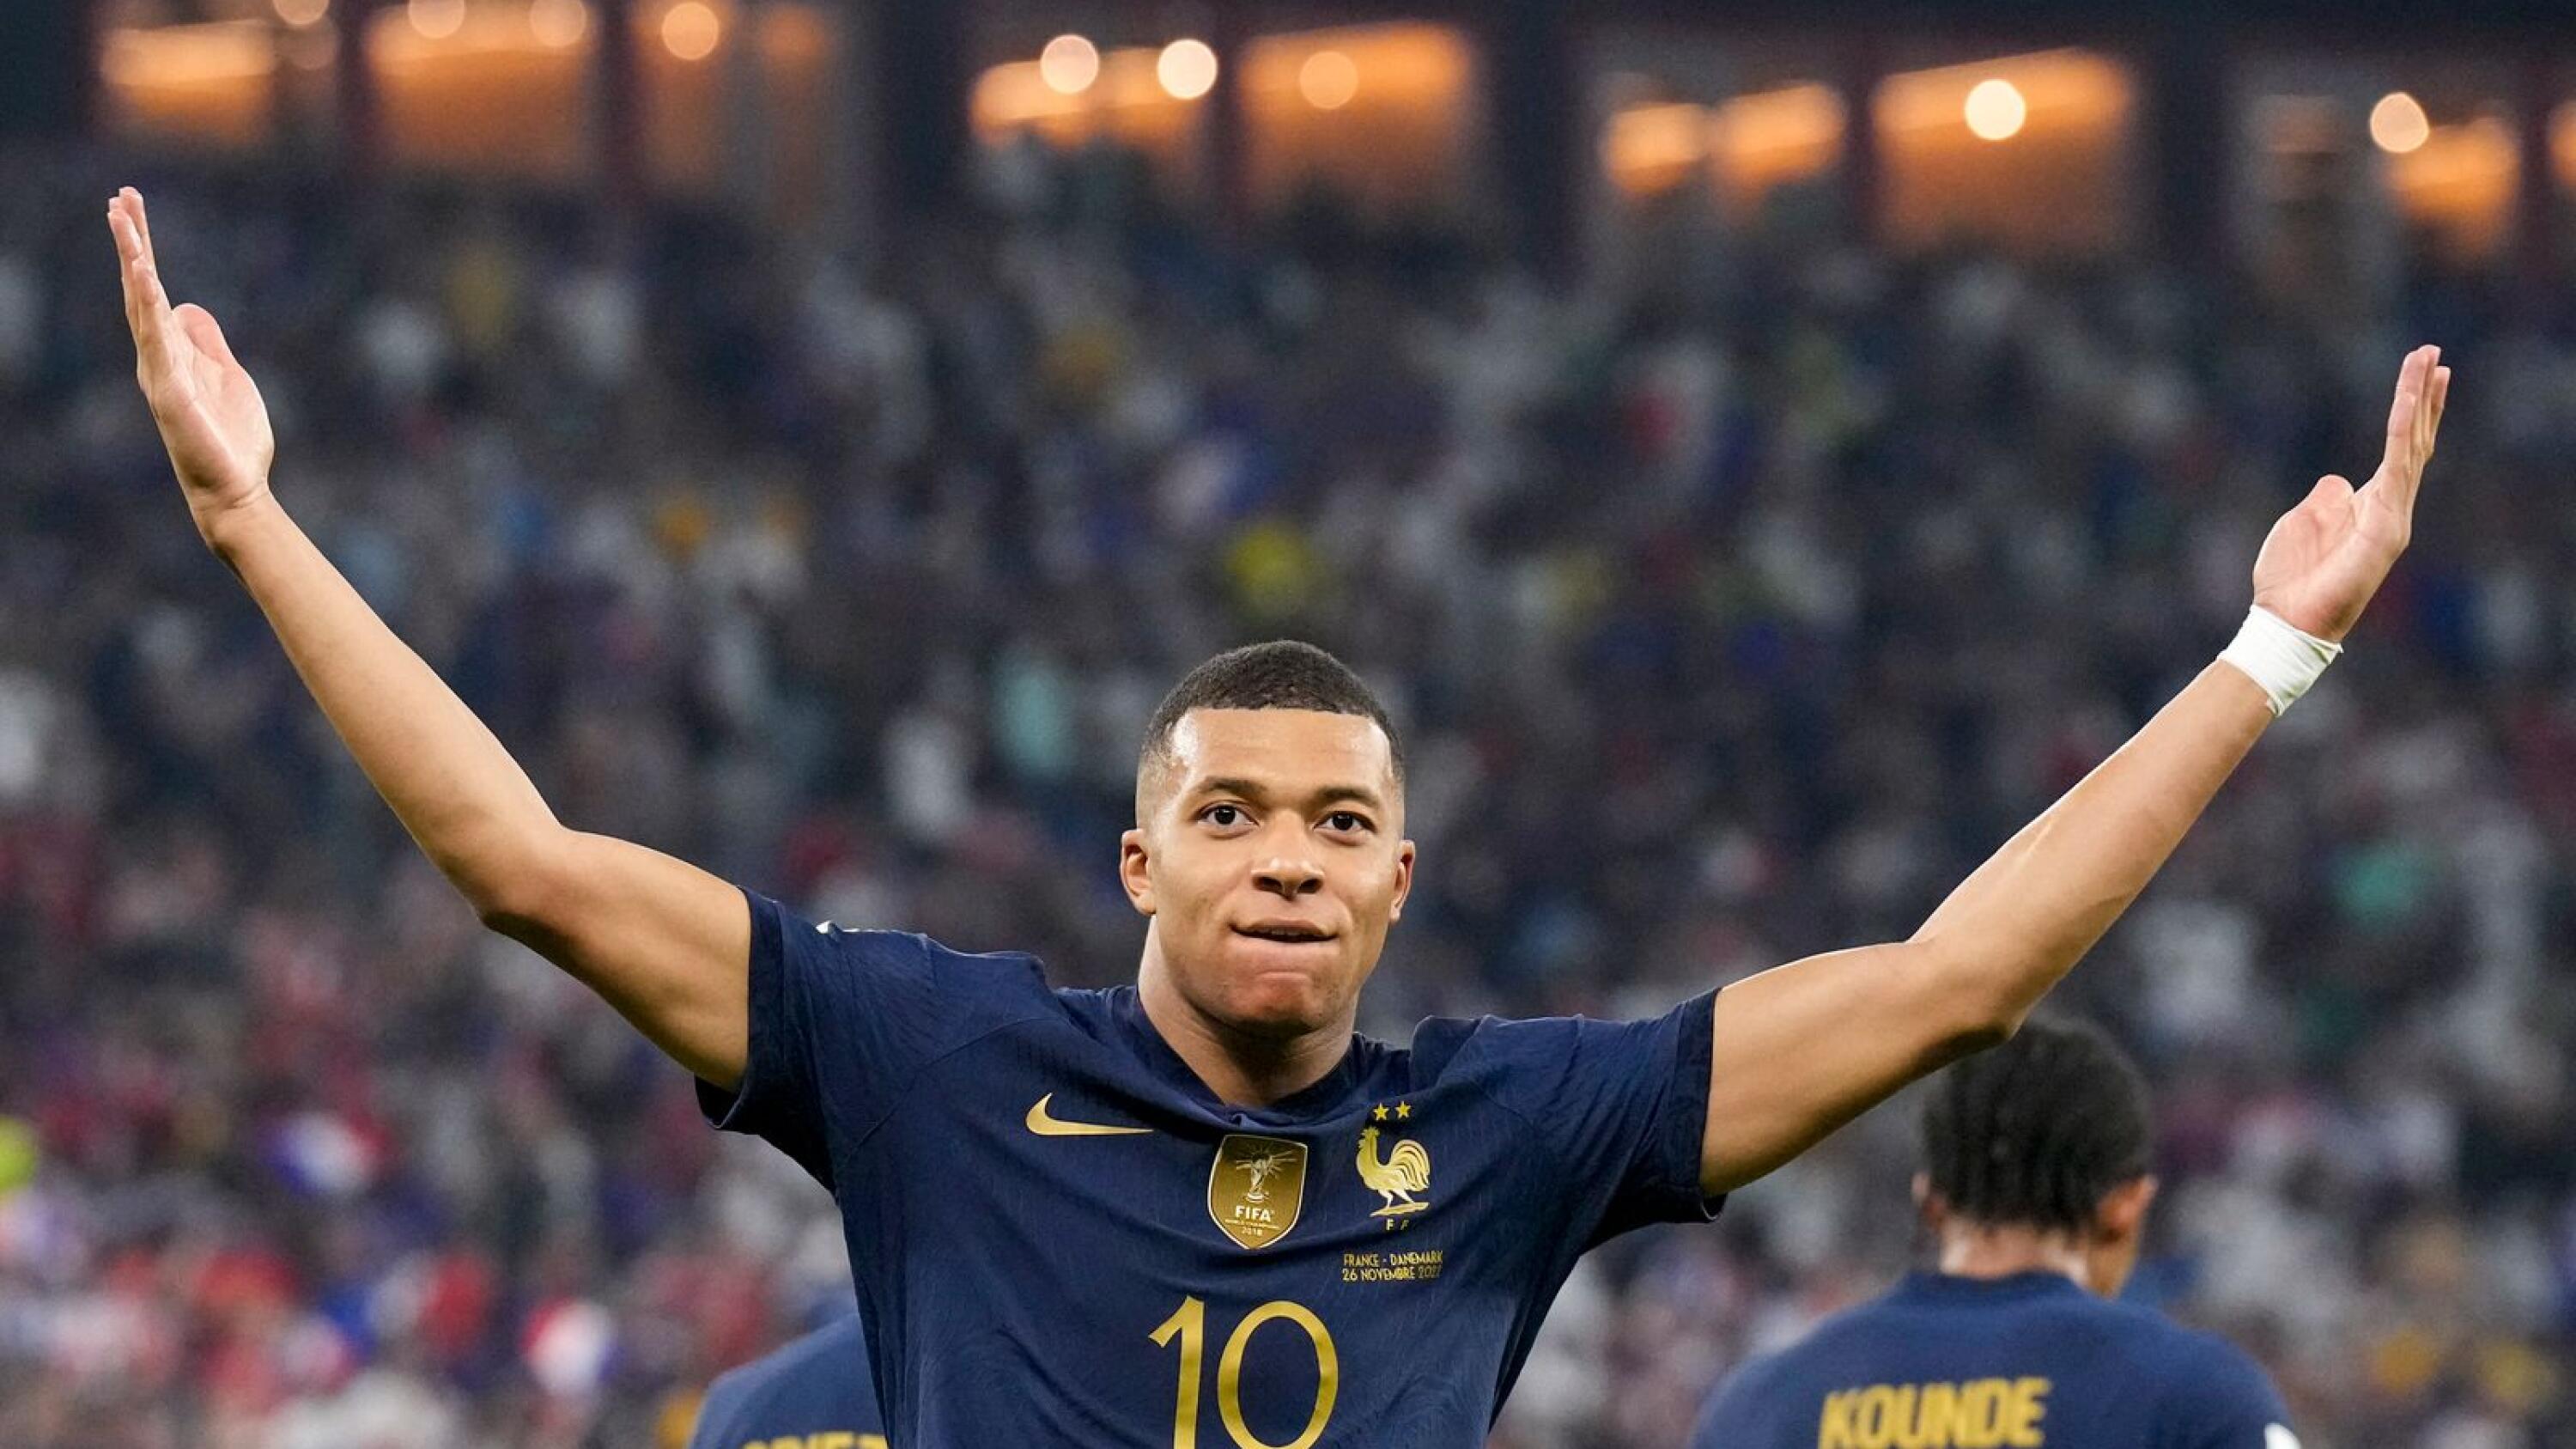 Mbappe scores twice, France reaches knockout stage of World Cup